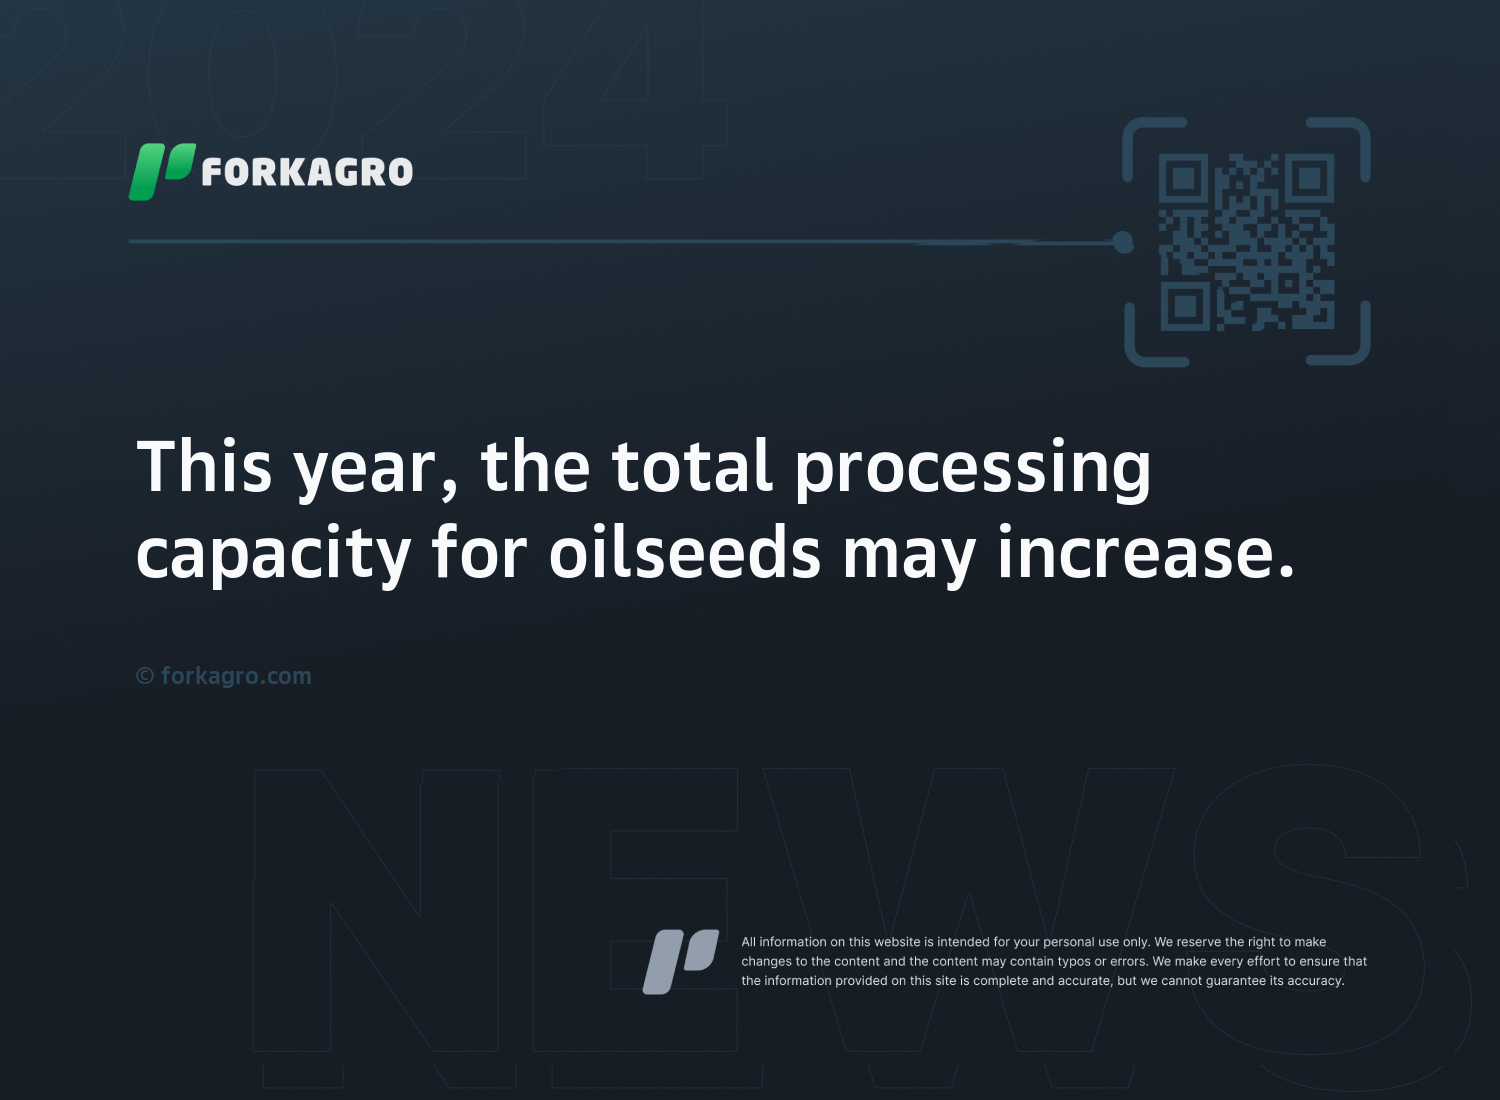 This year, the total processing capacity for oilseeds may increase.